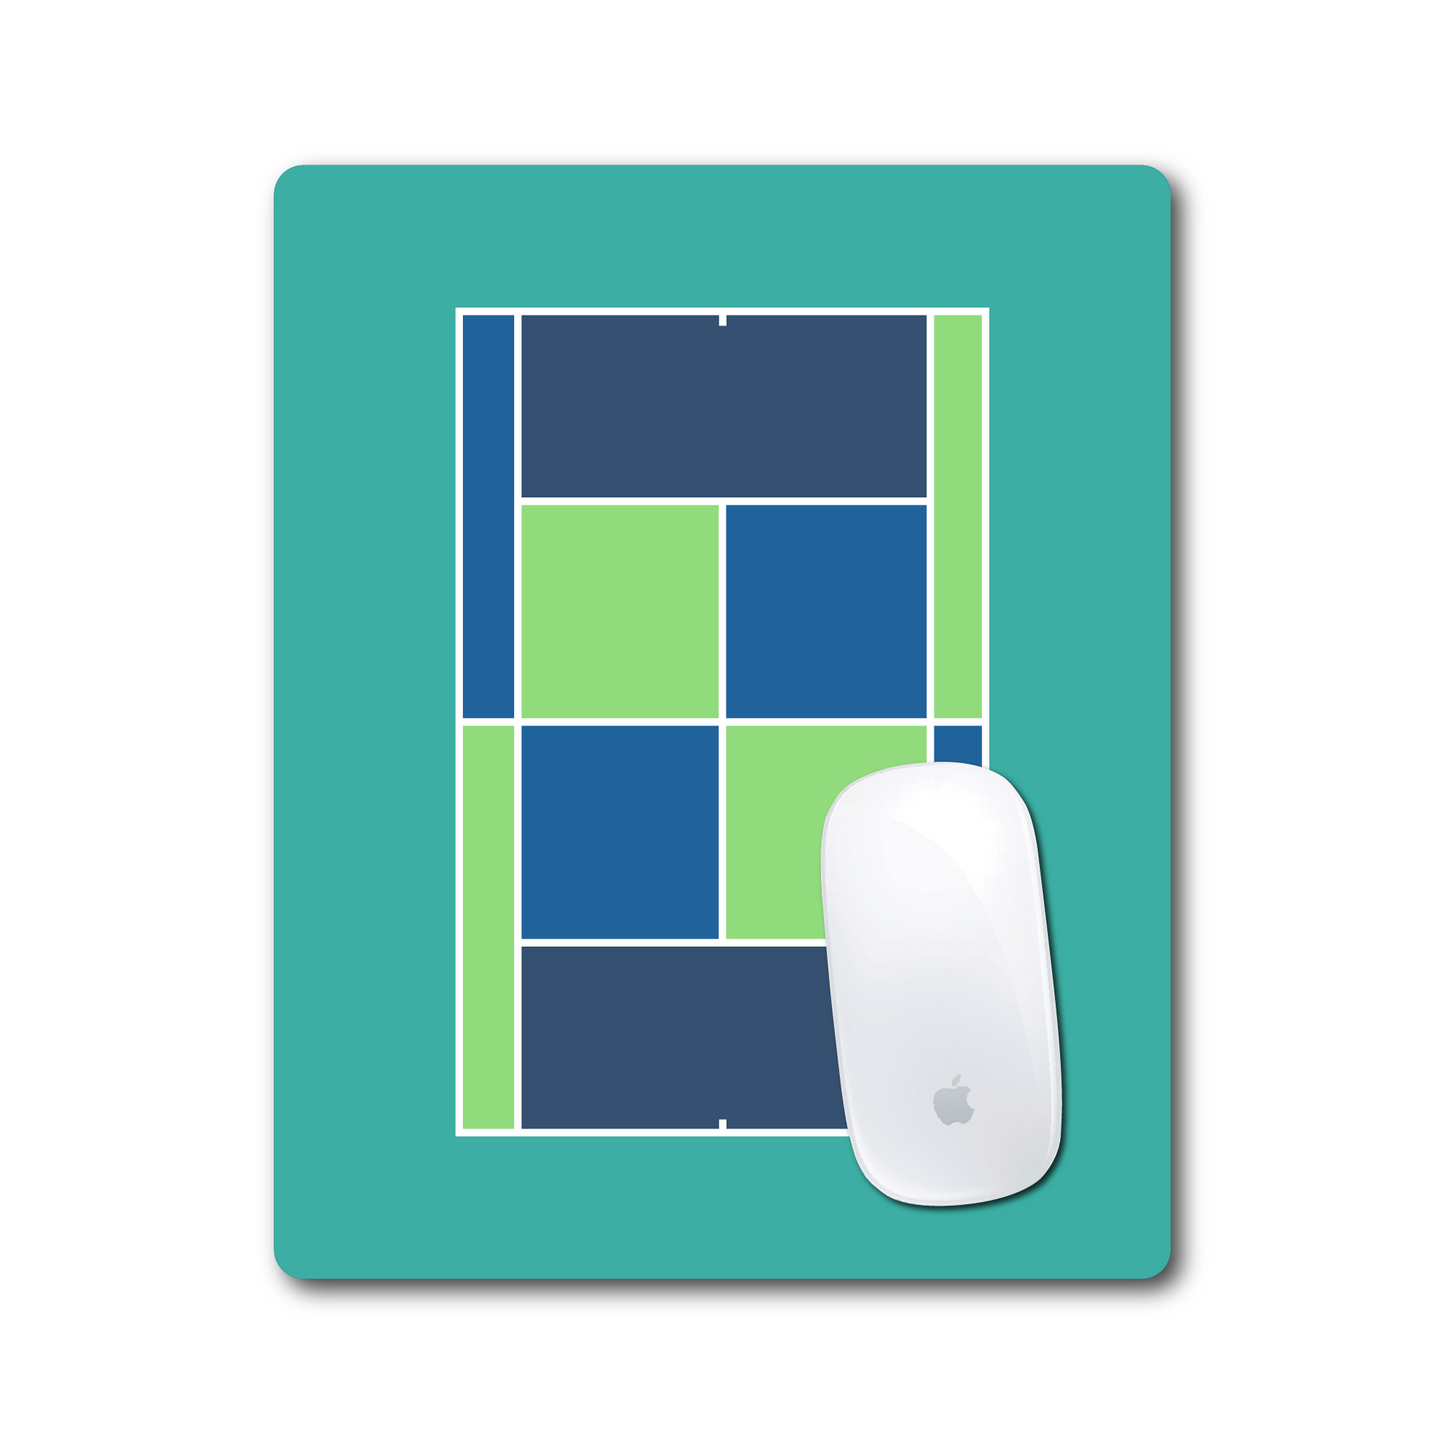 Tennis Court Mouse Pad - Teal - Racquet (Racket) Inc Tennis Gifts